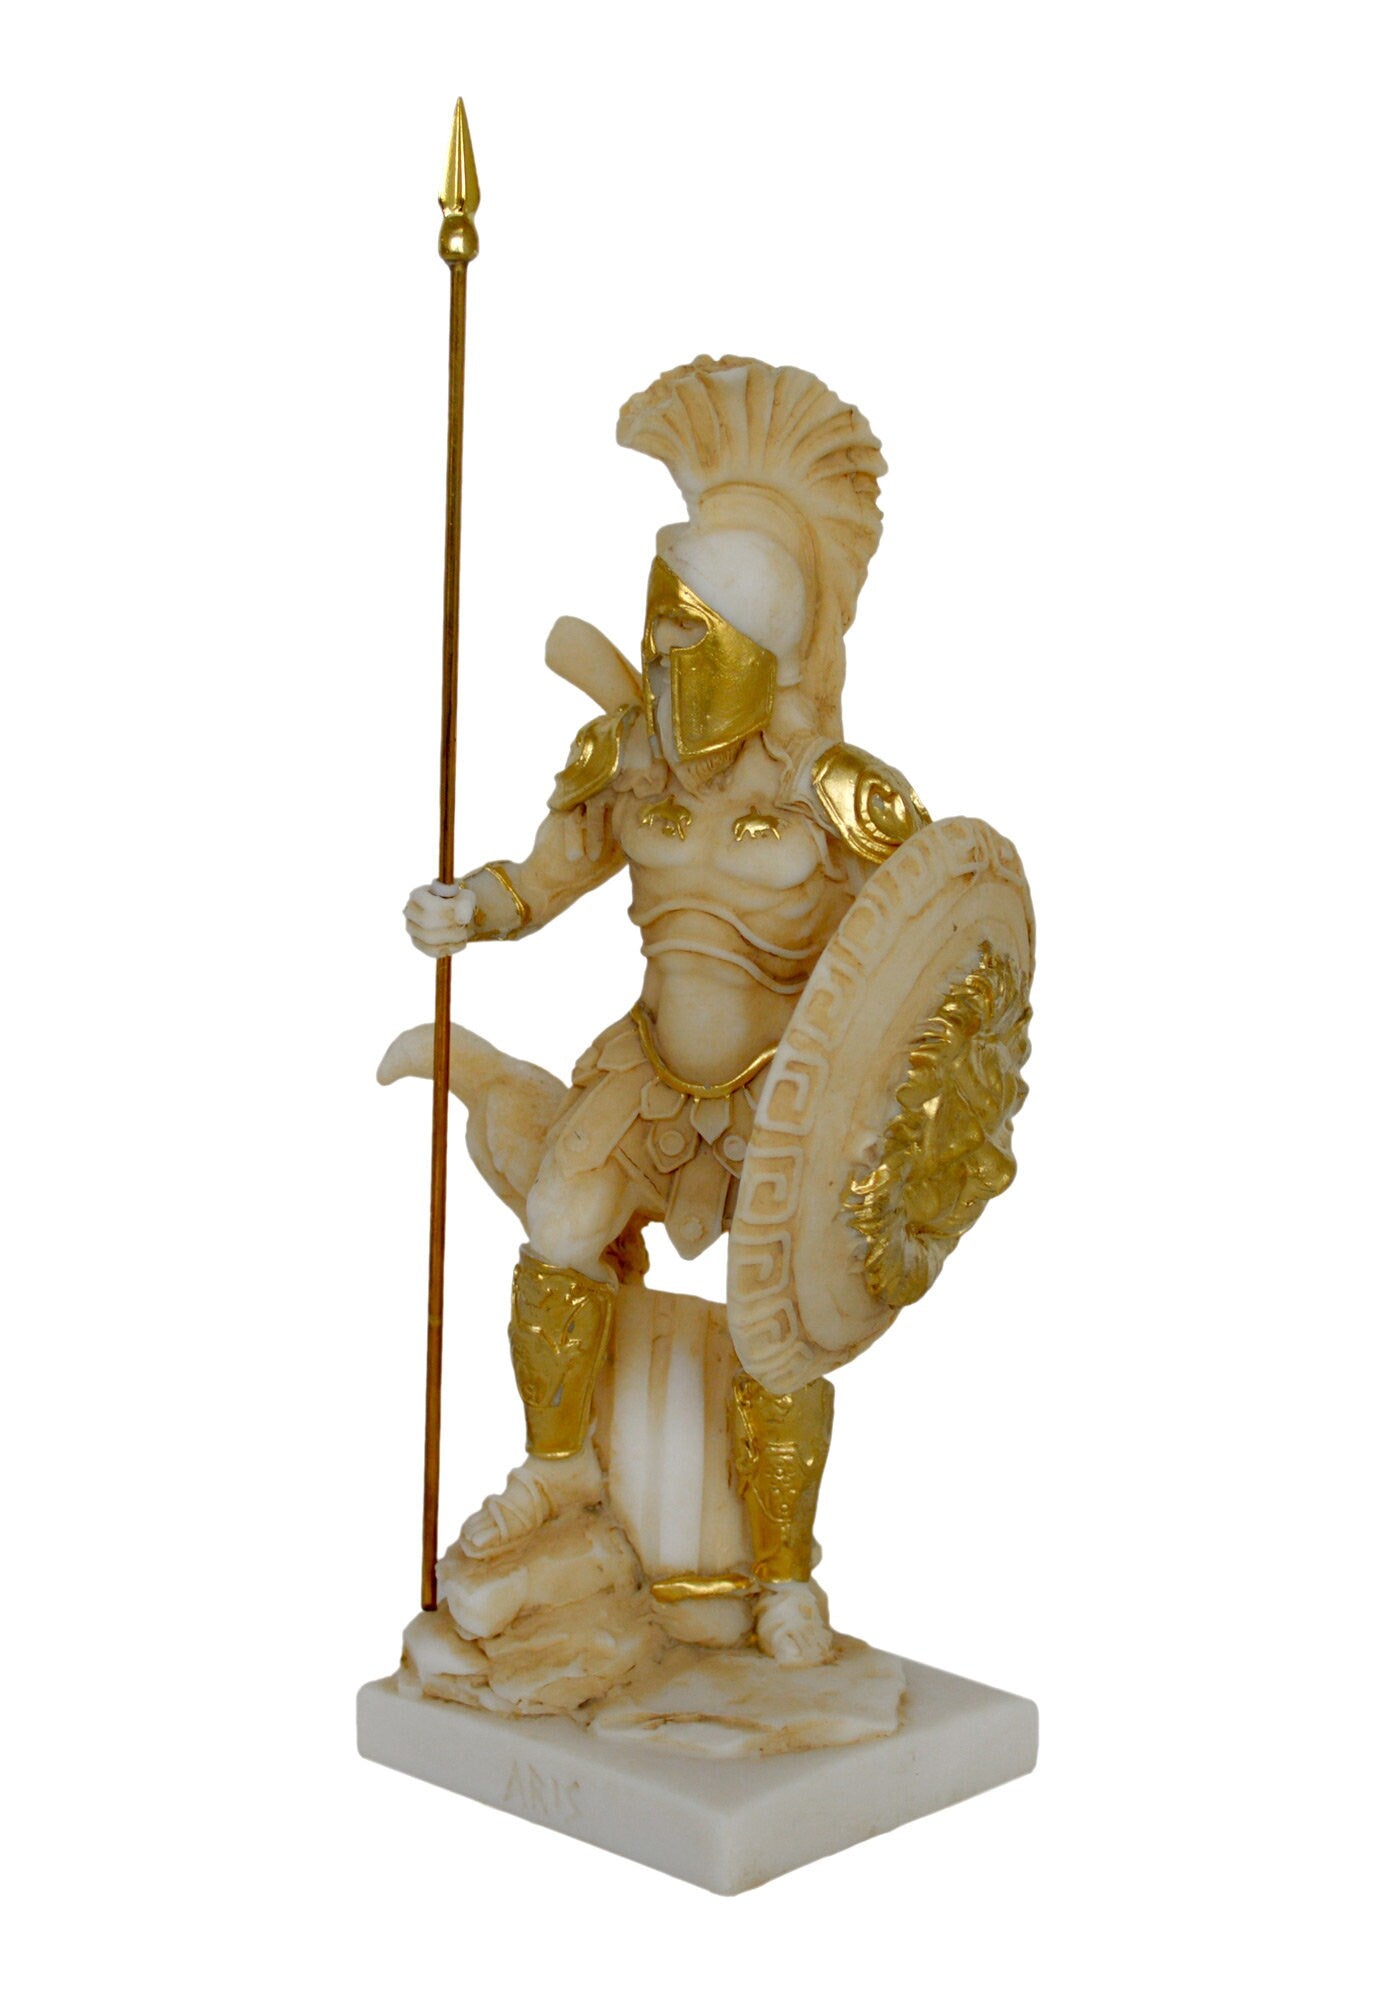 Ares Mars - Greek Roman God of War and Courage - Spirit of Battle - Son of Zeus and Hera - Olympian God - Aged Alabaster Statue